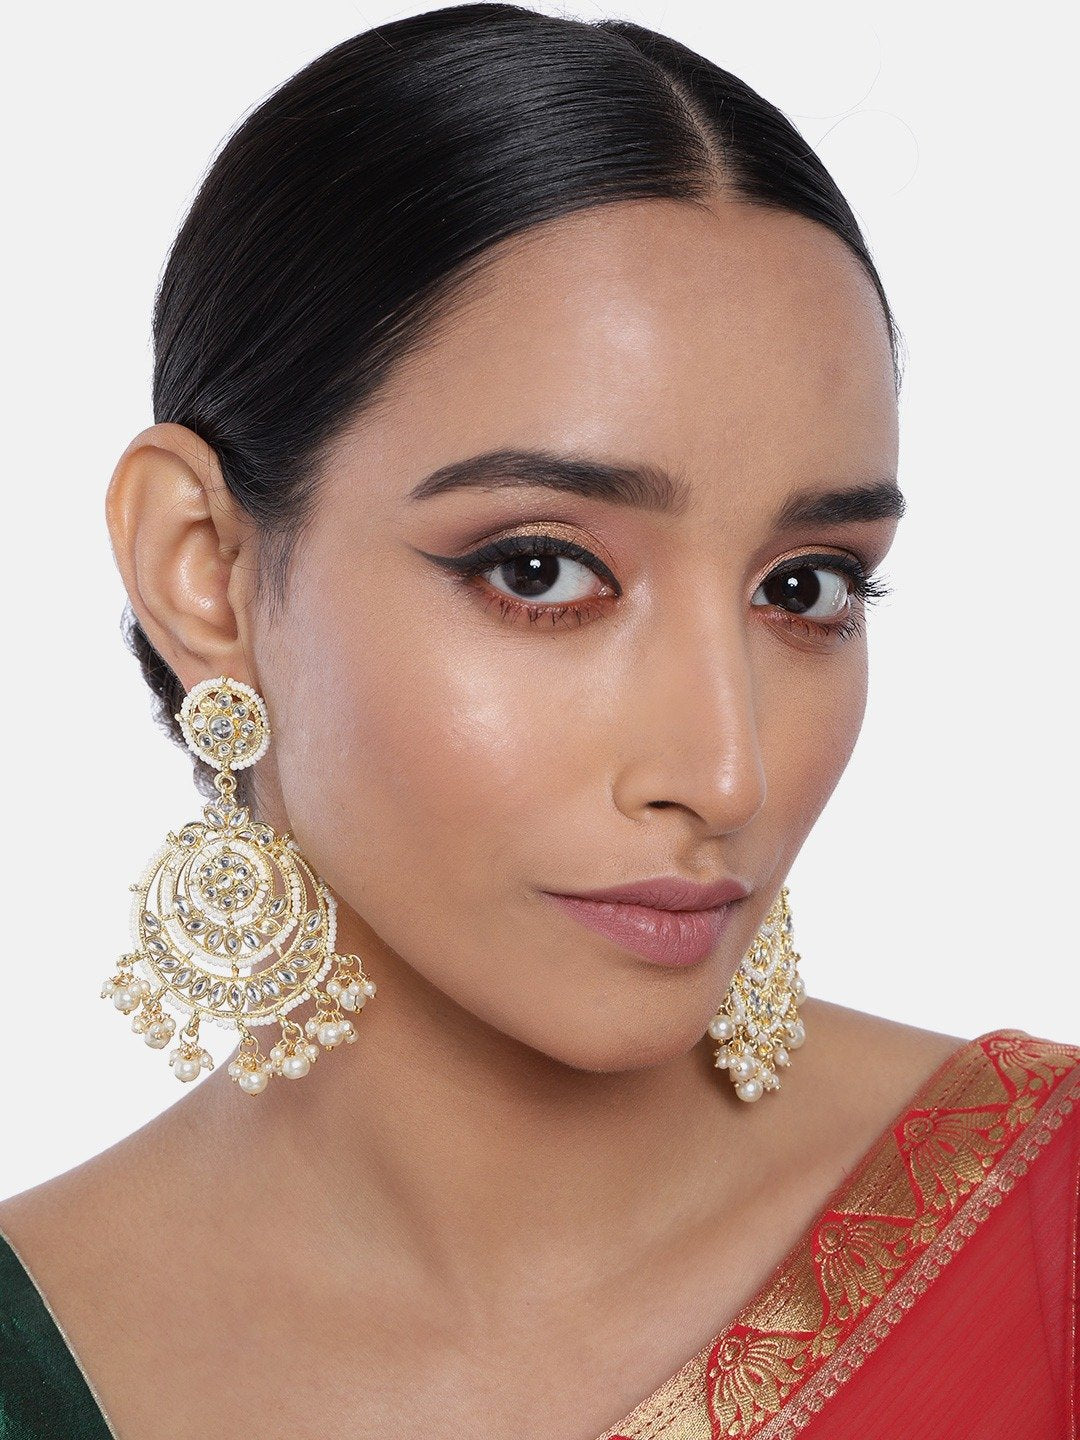 Women's  Gold Plated White Beaded Chandbali Earrings Glided With Kundans & Pearls  - i jewels